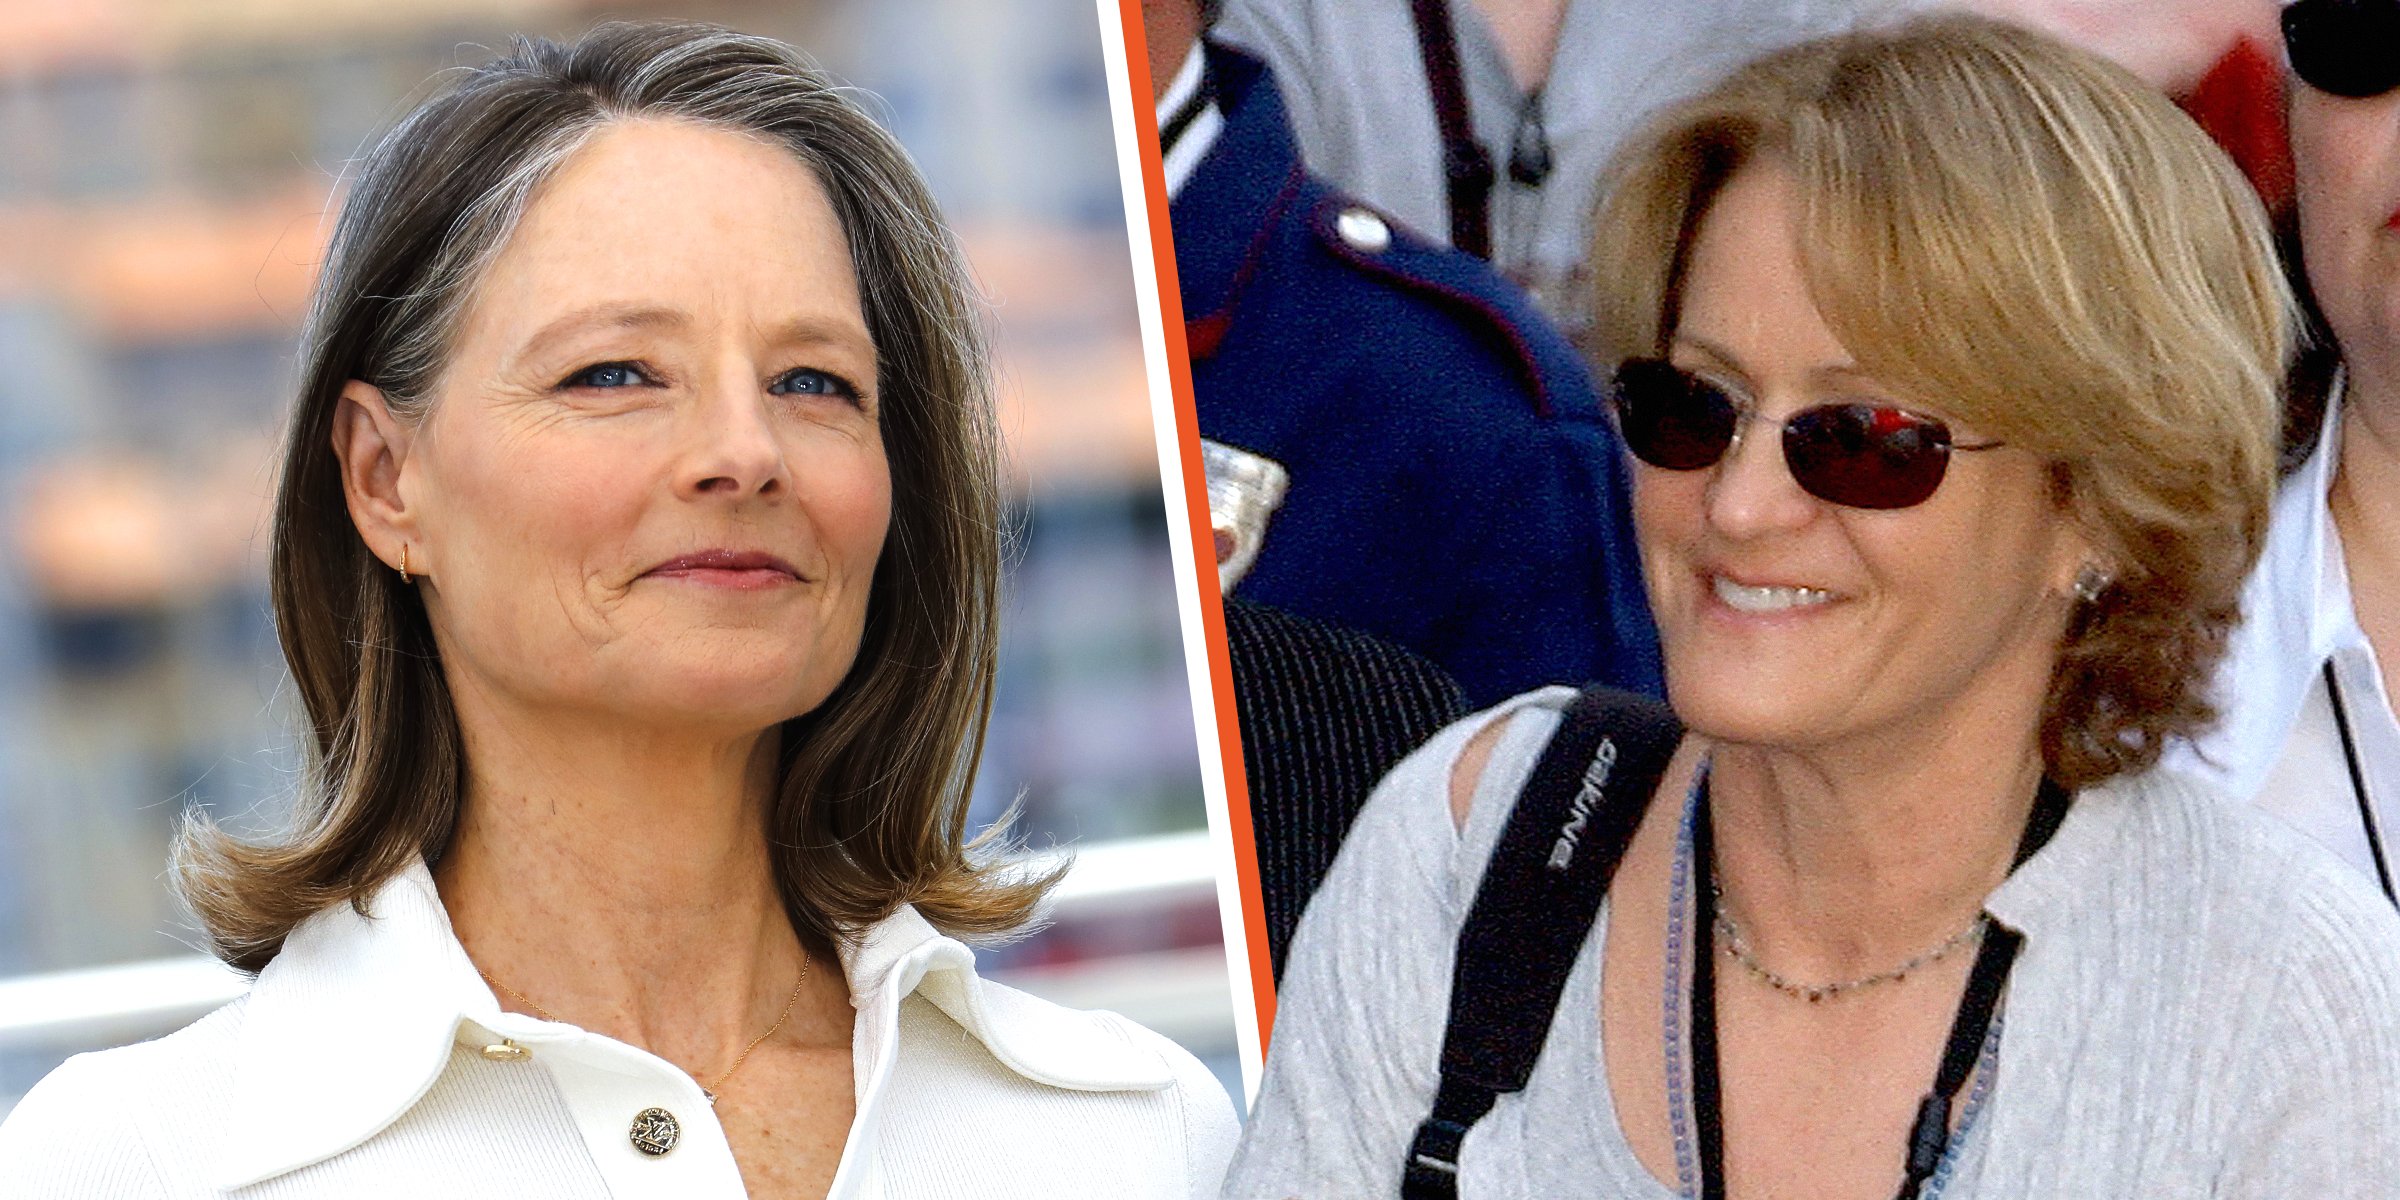 Cydney Bernard Was Jodie Foster's Partner for 15 Years and They Share 2